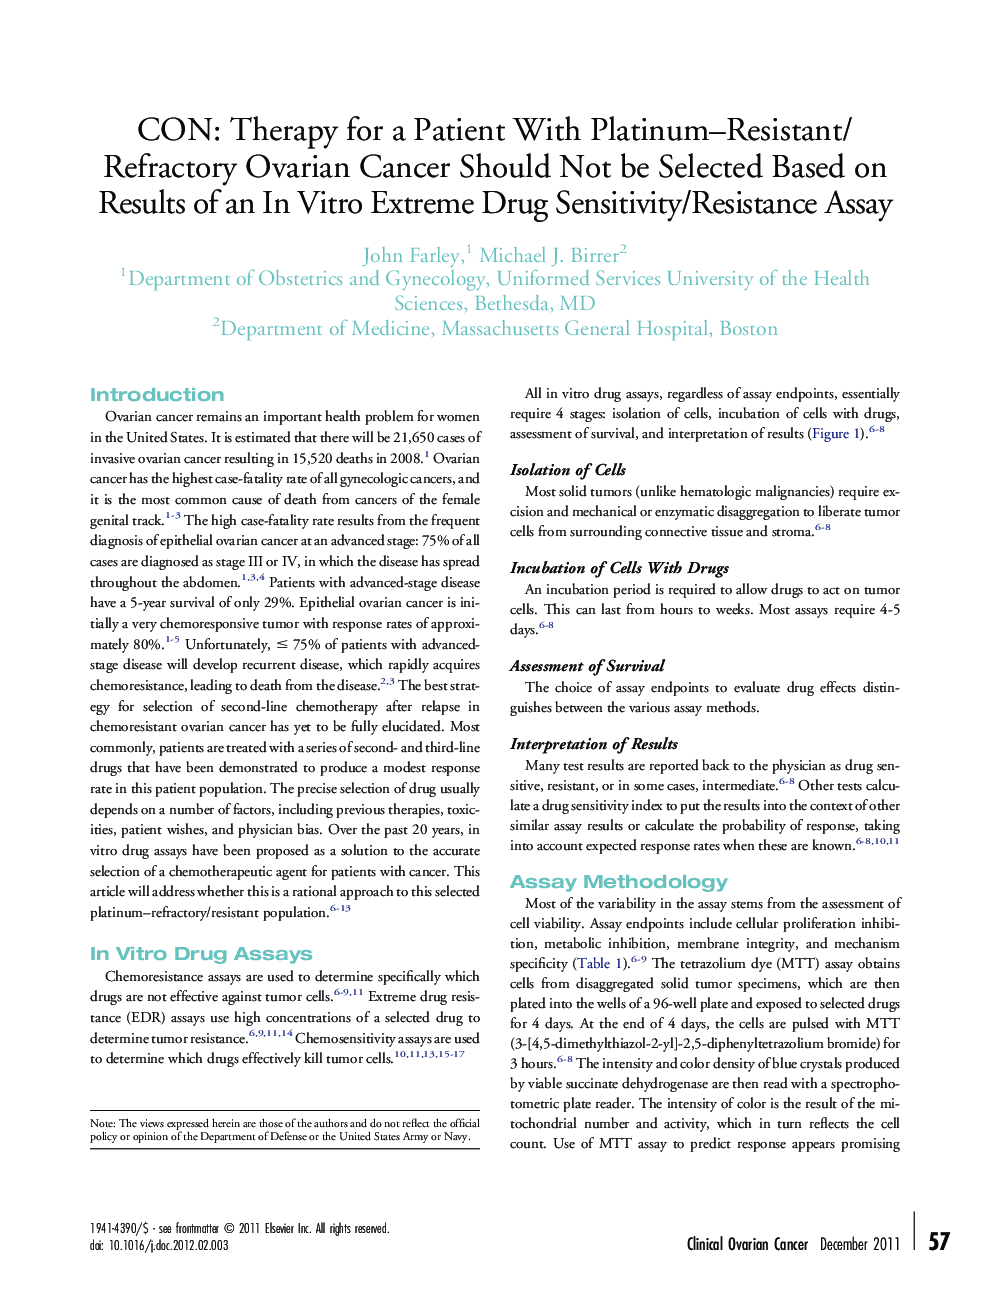 CON: Therapy for a Patient With Platinum-Resistant/Refractory Ovarian Cancer Should Not be Selected Based on Results of an In Vitro Extreme Drug Sensitivity/Resistance Assay